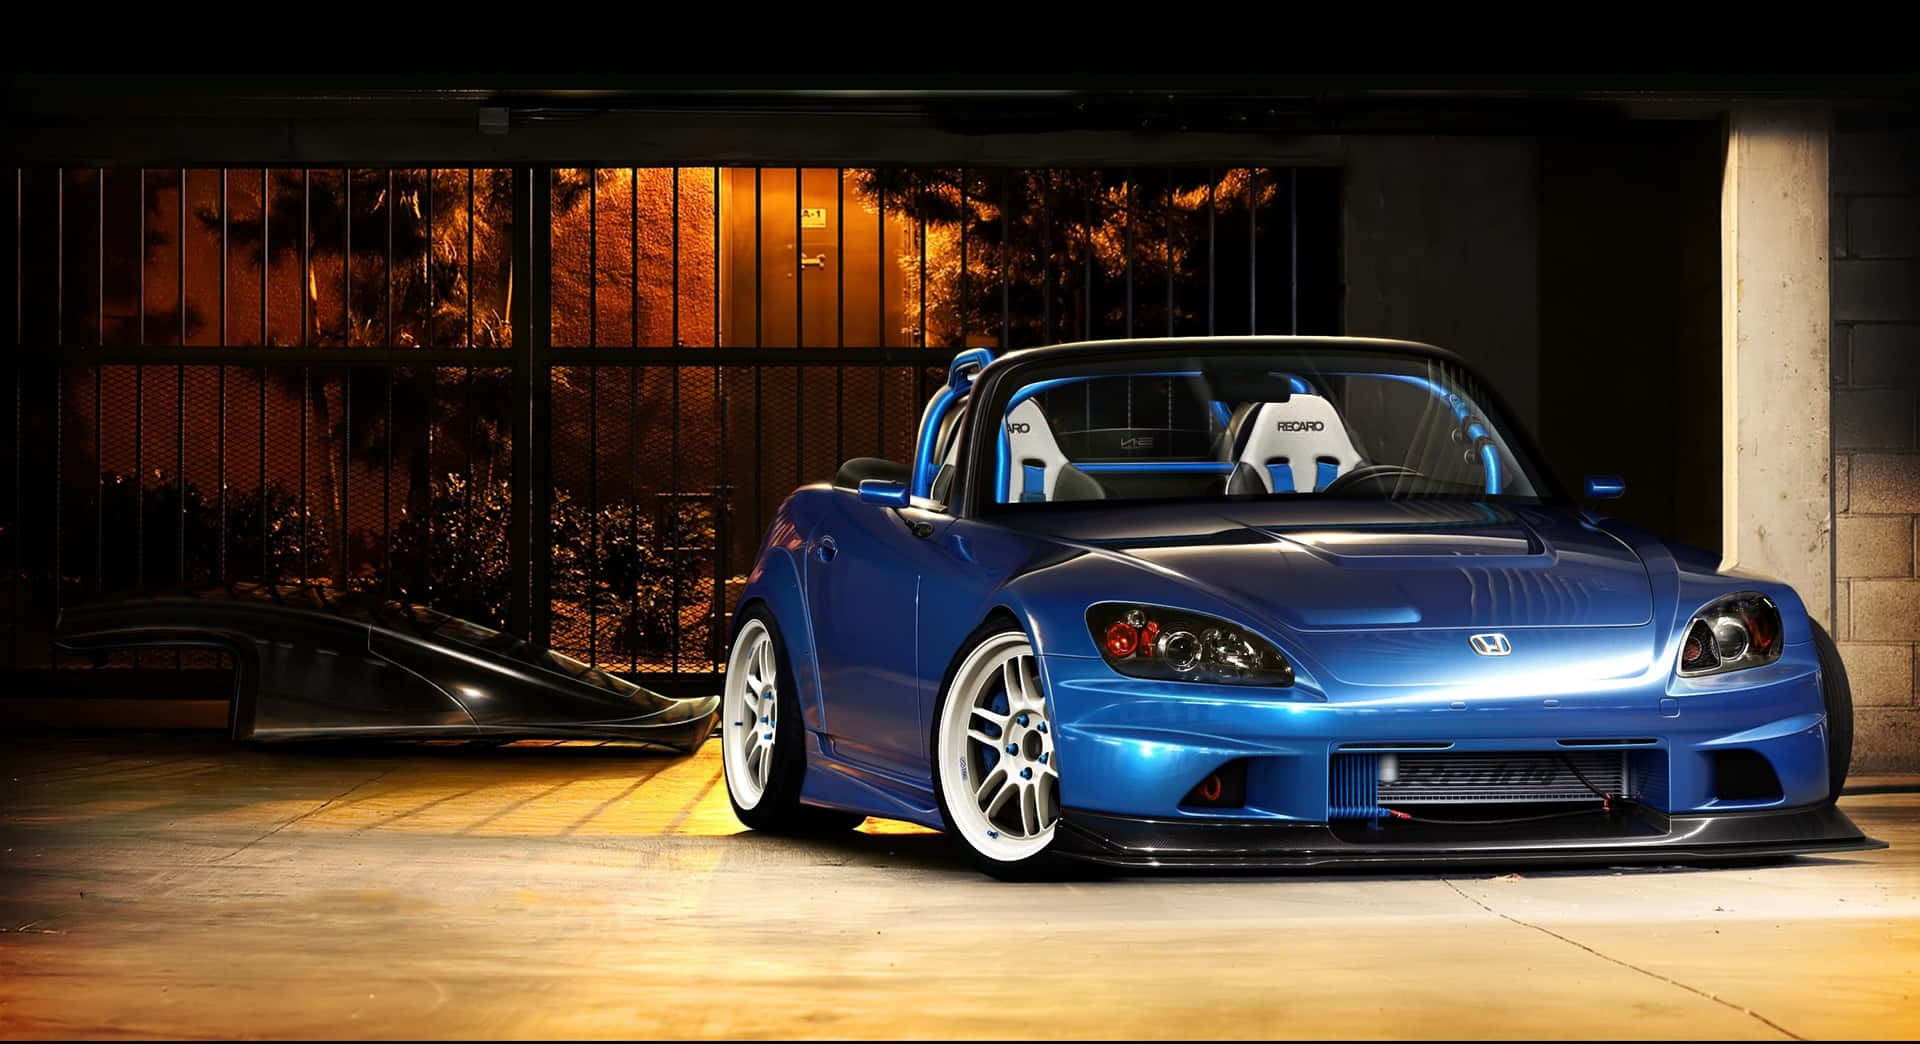 Show off your style with a Honda S2000 Wallpaper